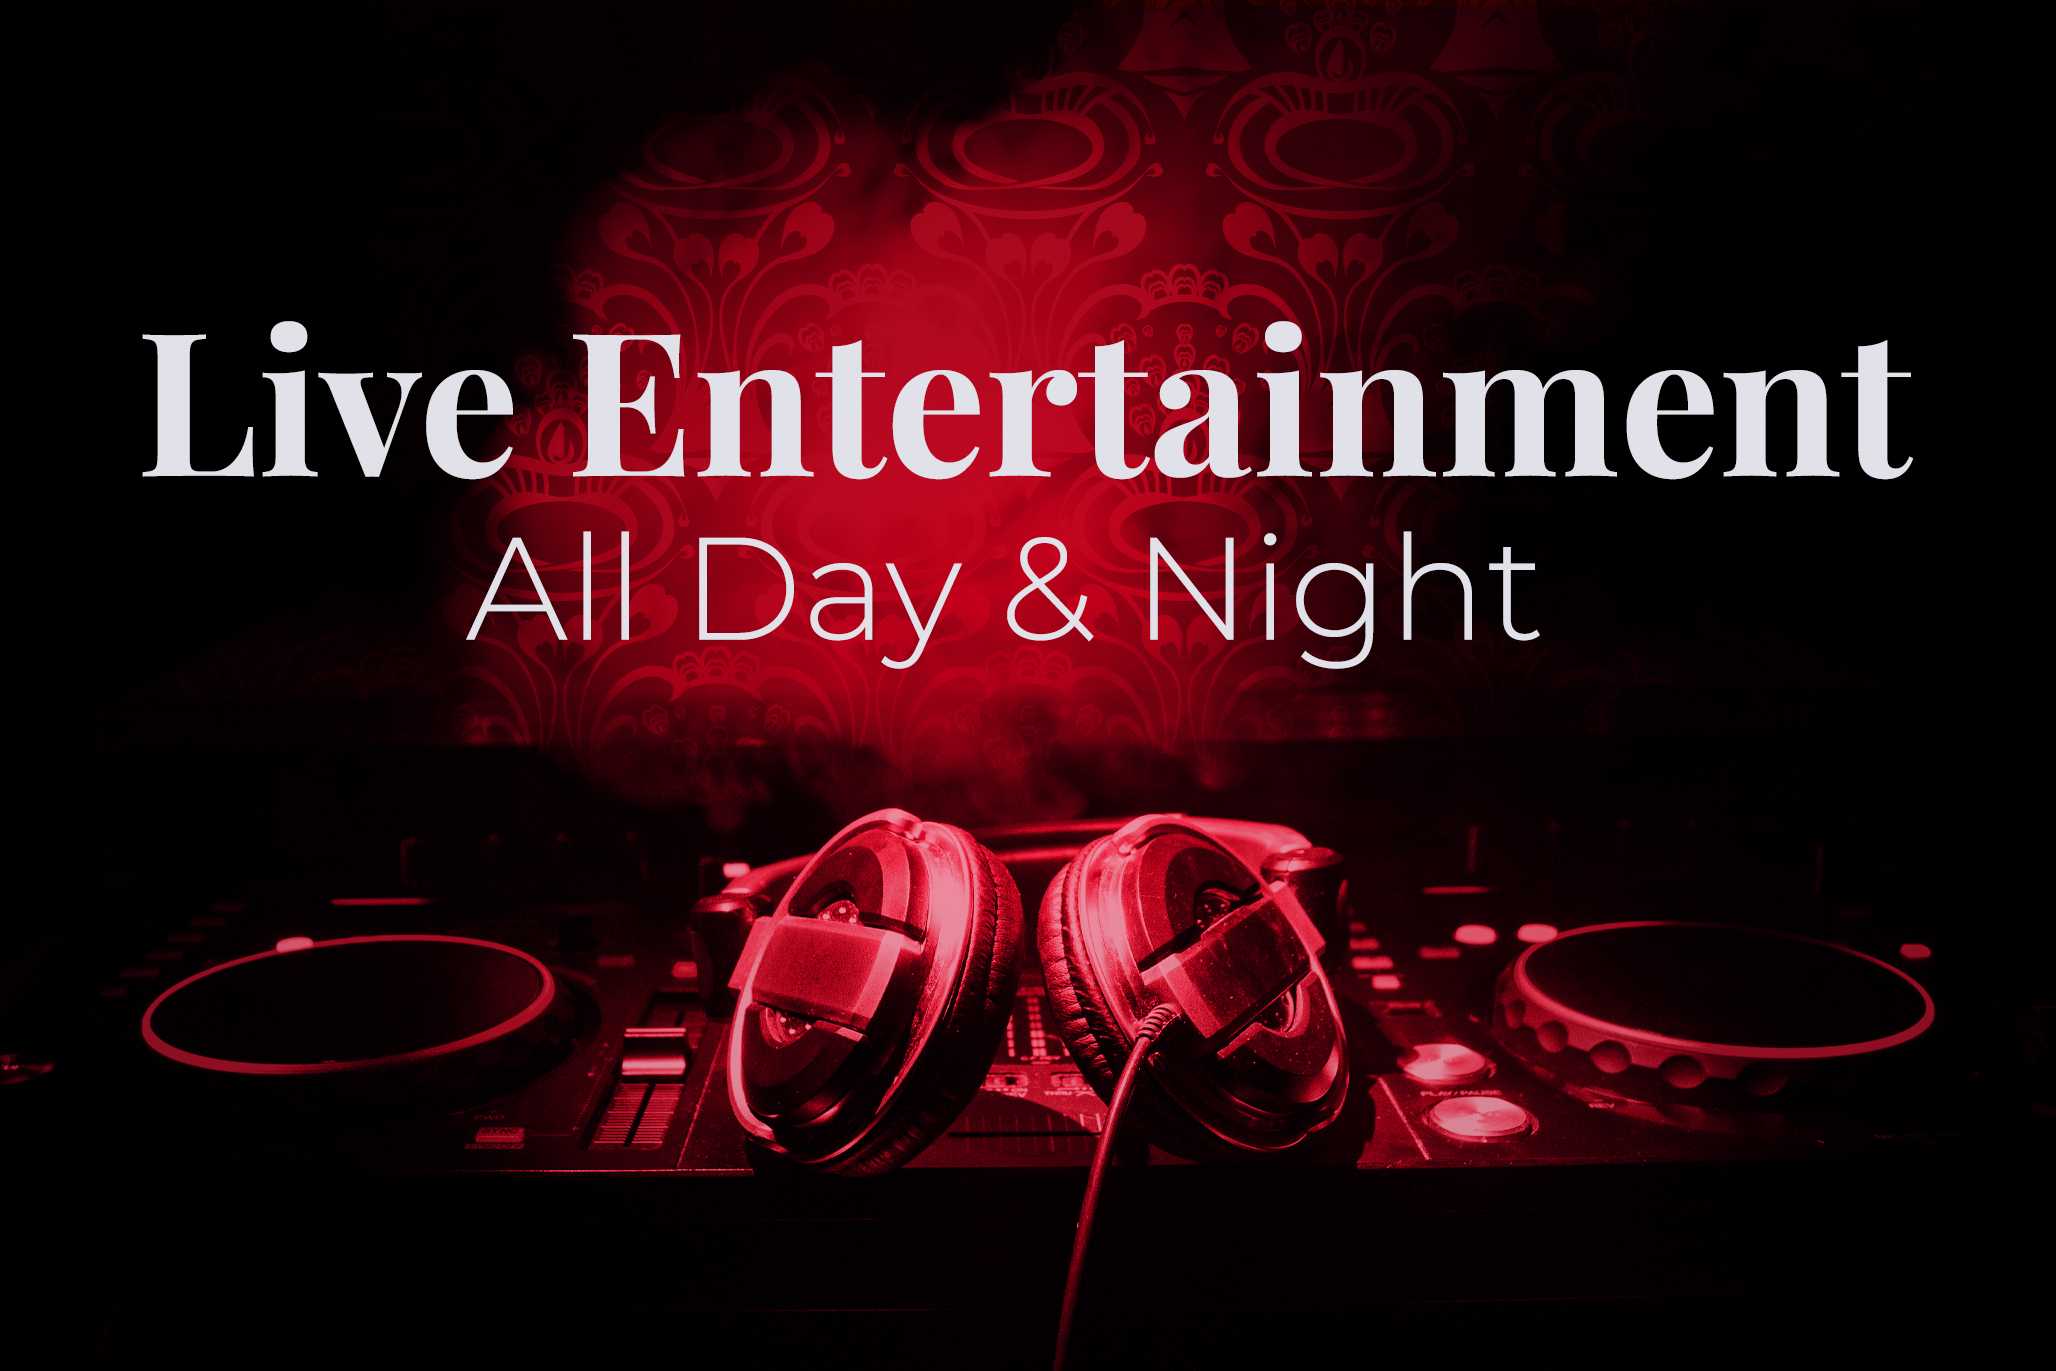 Live Entertainment All Day & Night